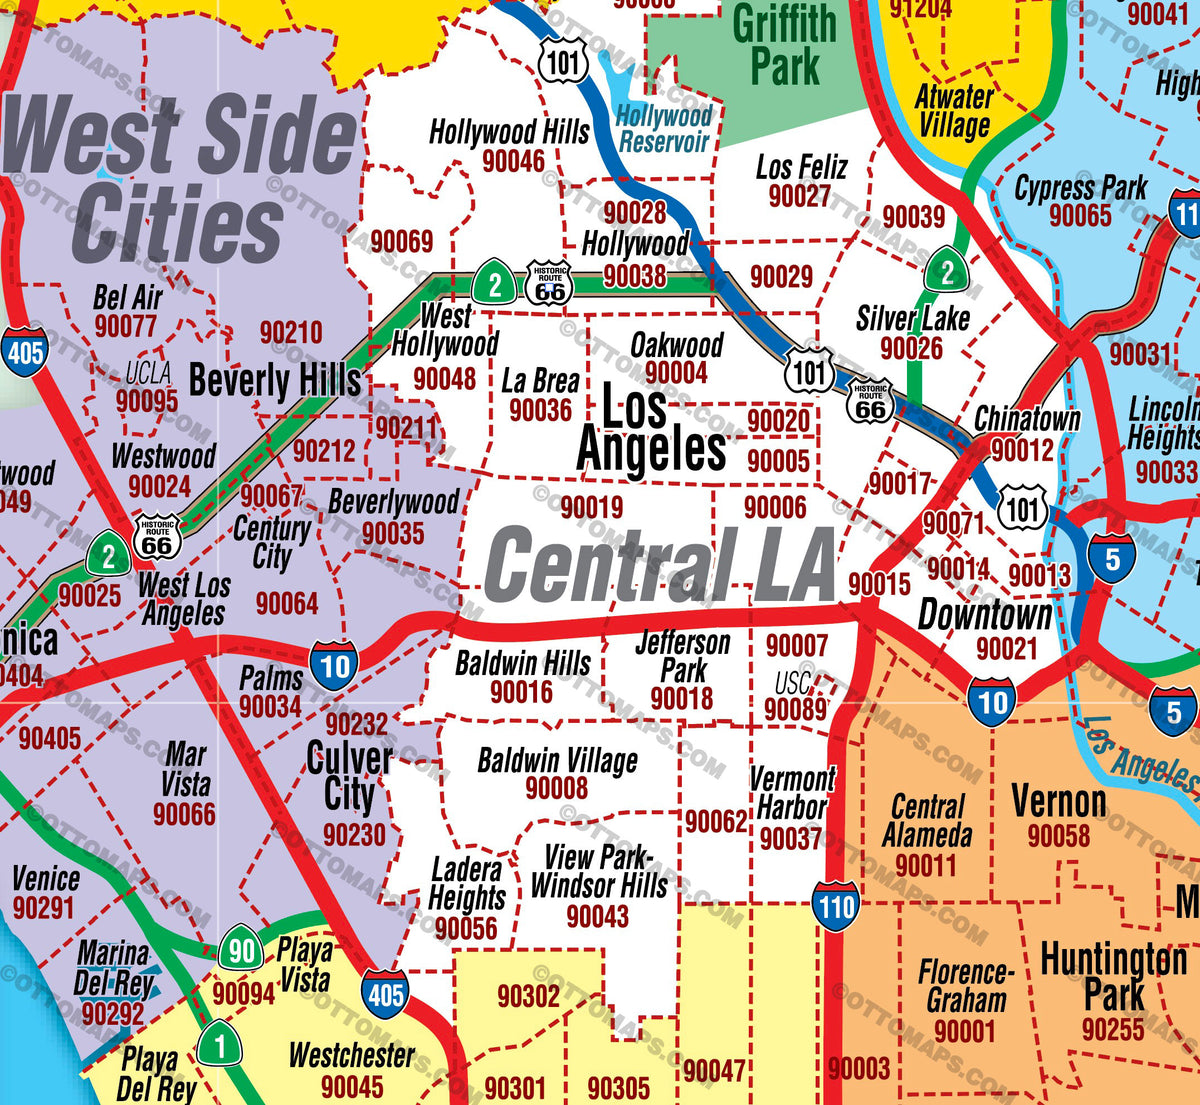 Los Angeles Zip Code Map - FULL (County Areas colorized) - Otto Maps